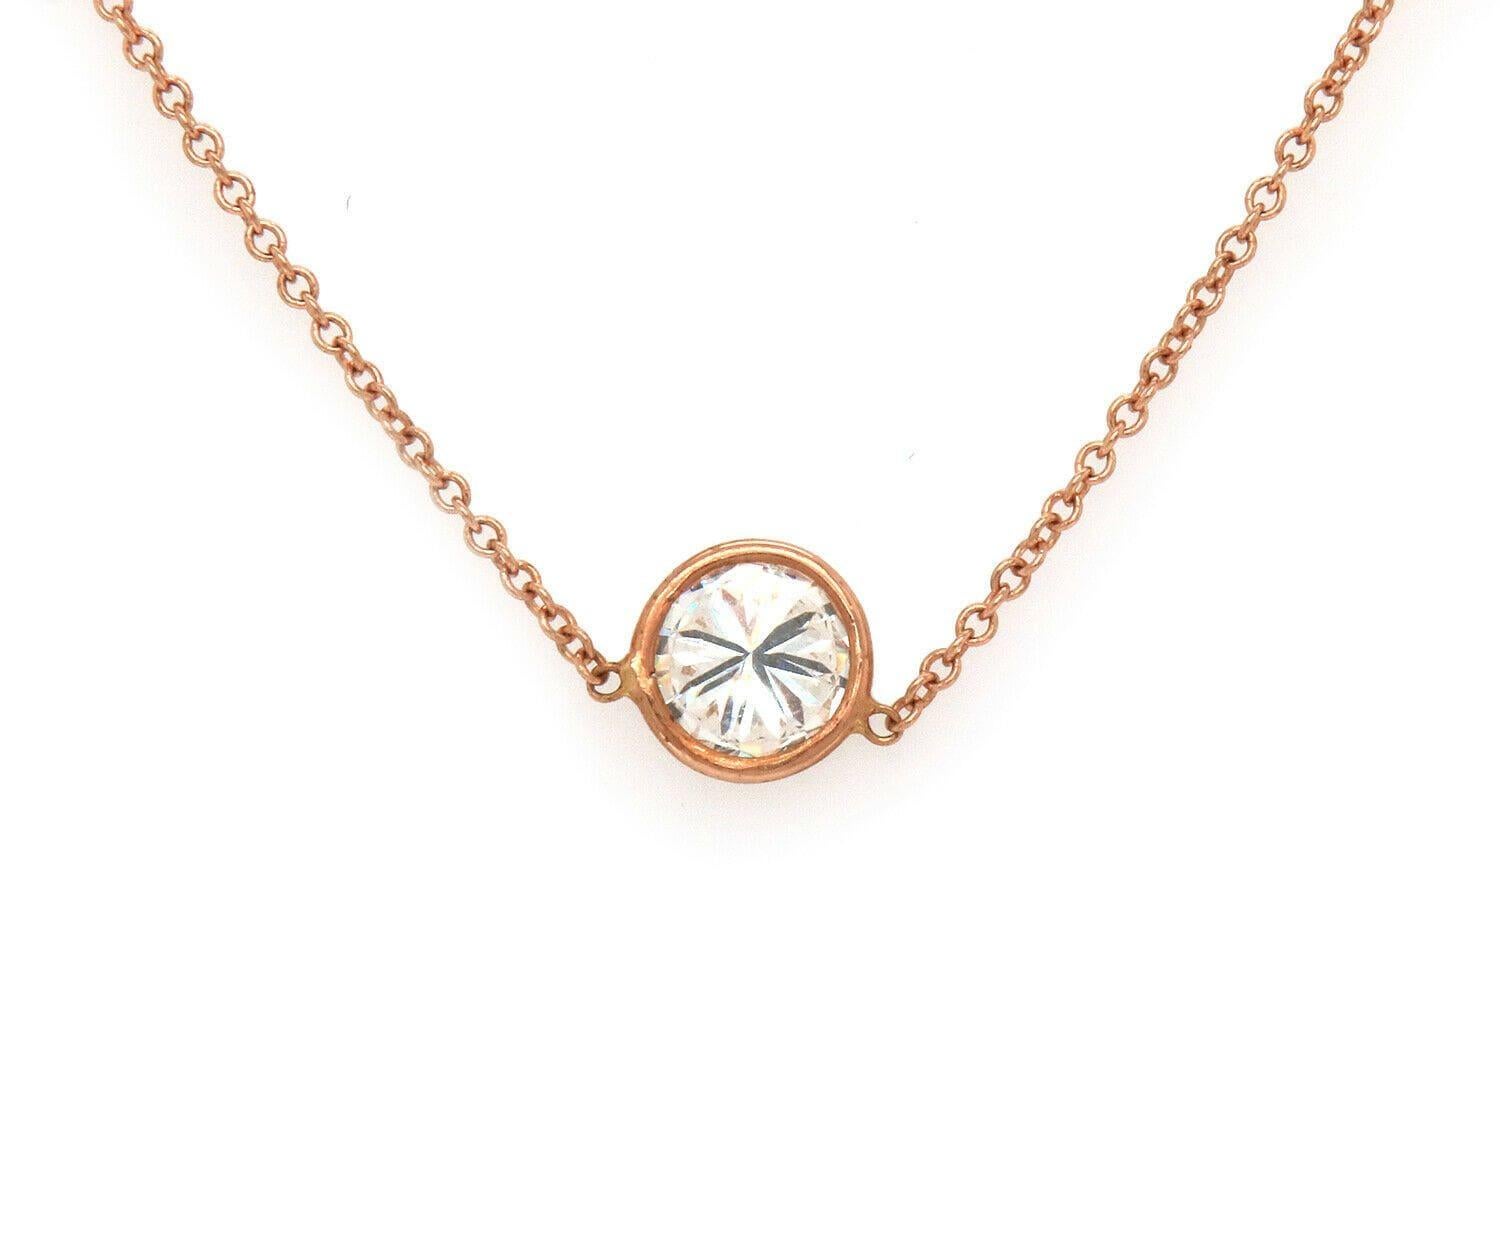 0.56ctw Diamond Solitaire Pendant Necklace 14K Rose Gold W/ Cert In Excellent Condition For Sale In Vienna, VA